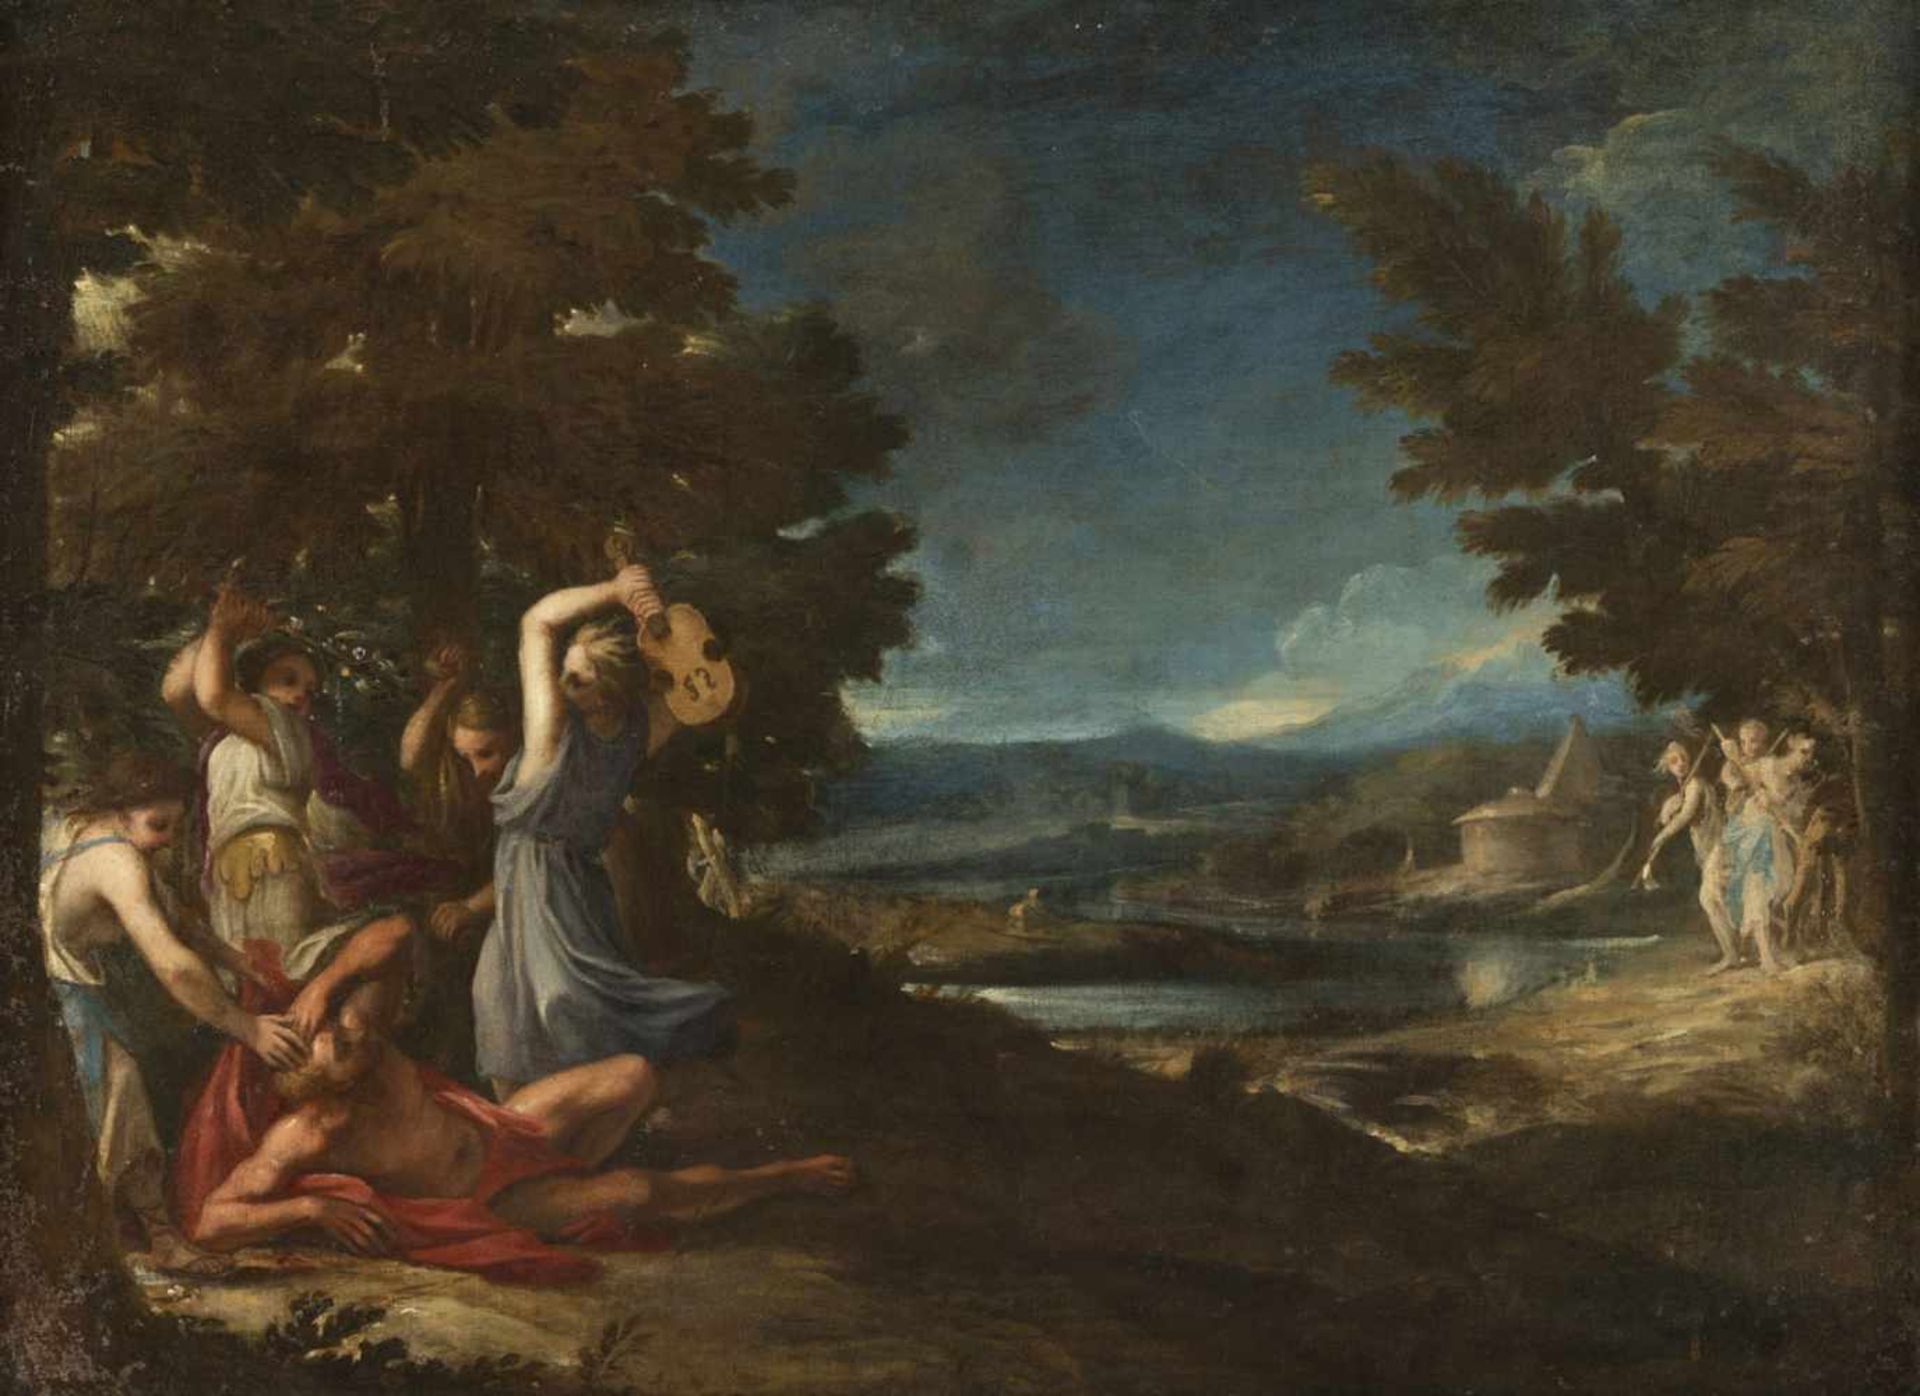 VIOLA, GIOVANNI BATTISTA (attr., 1576-1662). Arcadian landscape with Orpheus and the maenads. Oil/